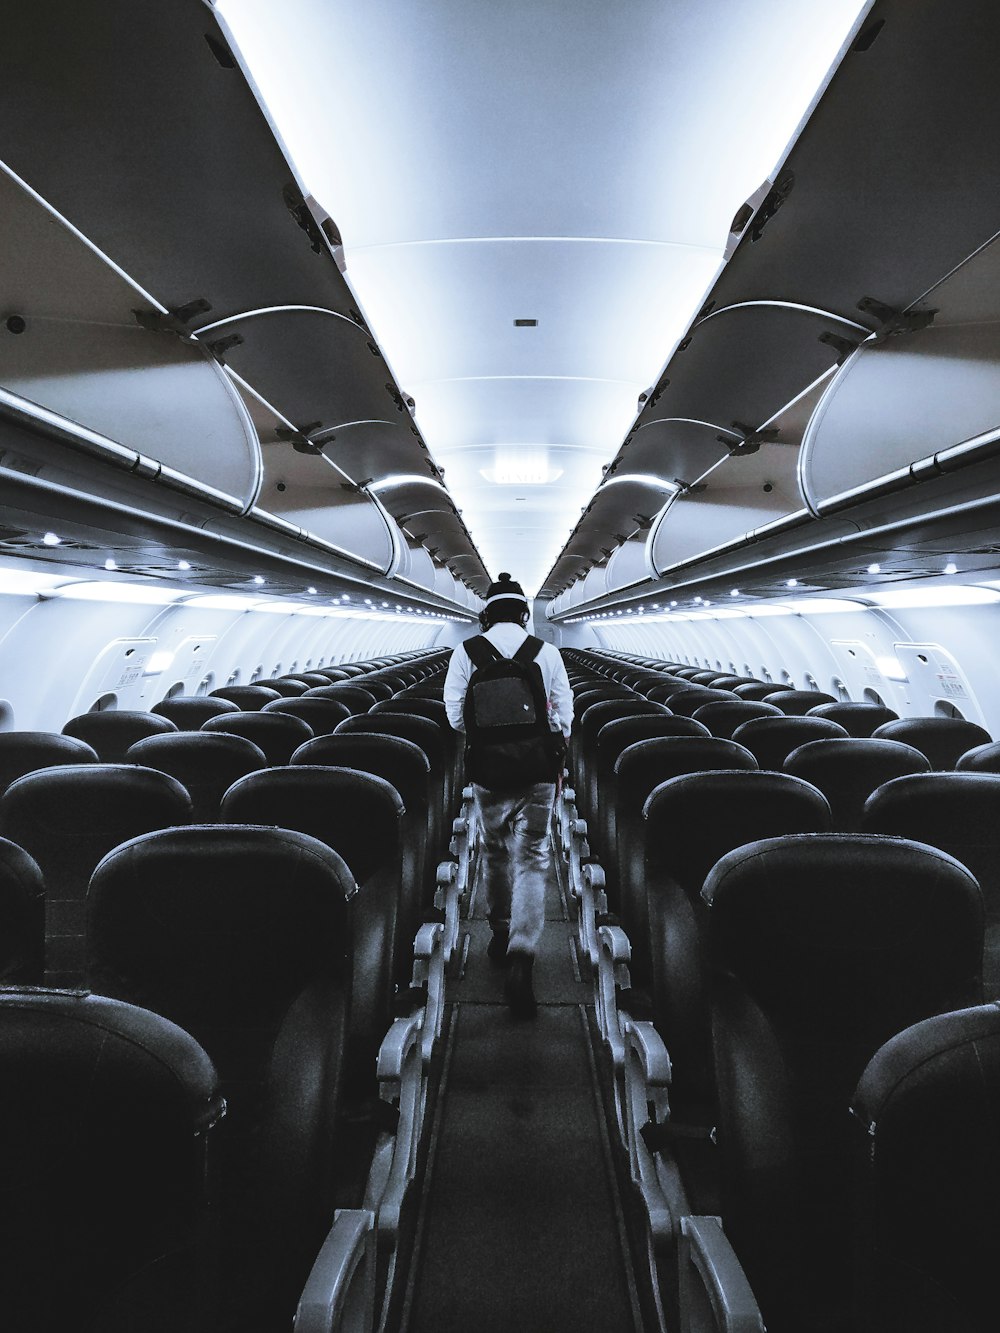 500 Inside Airplane Pictures Hd Download Free Images On Unsplash